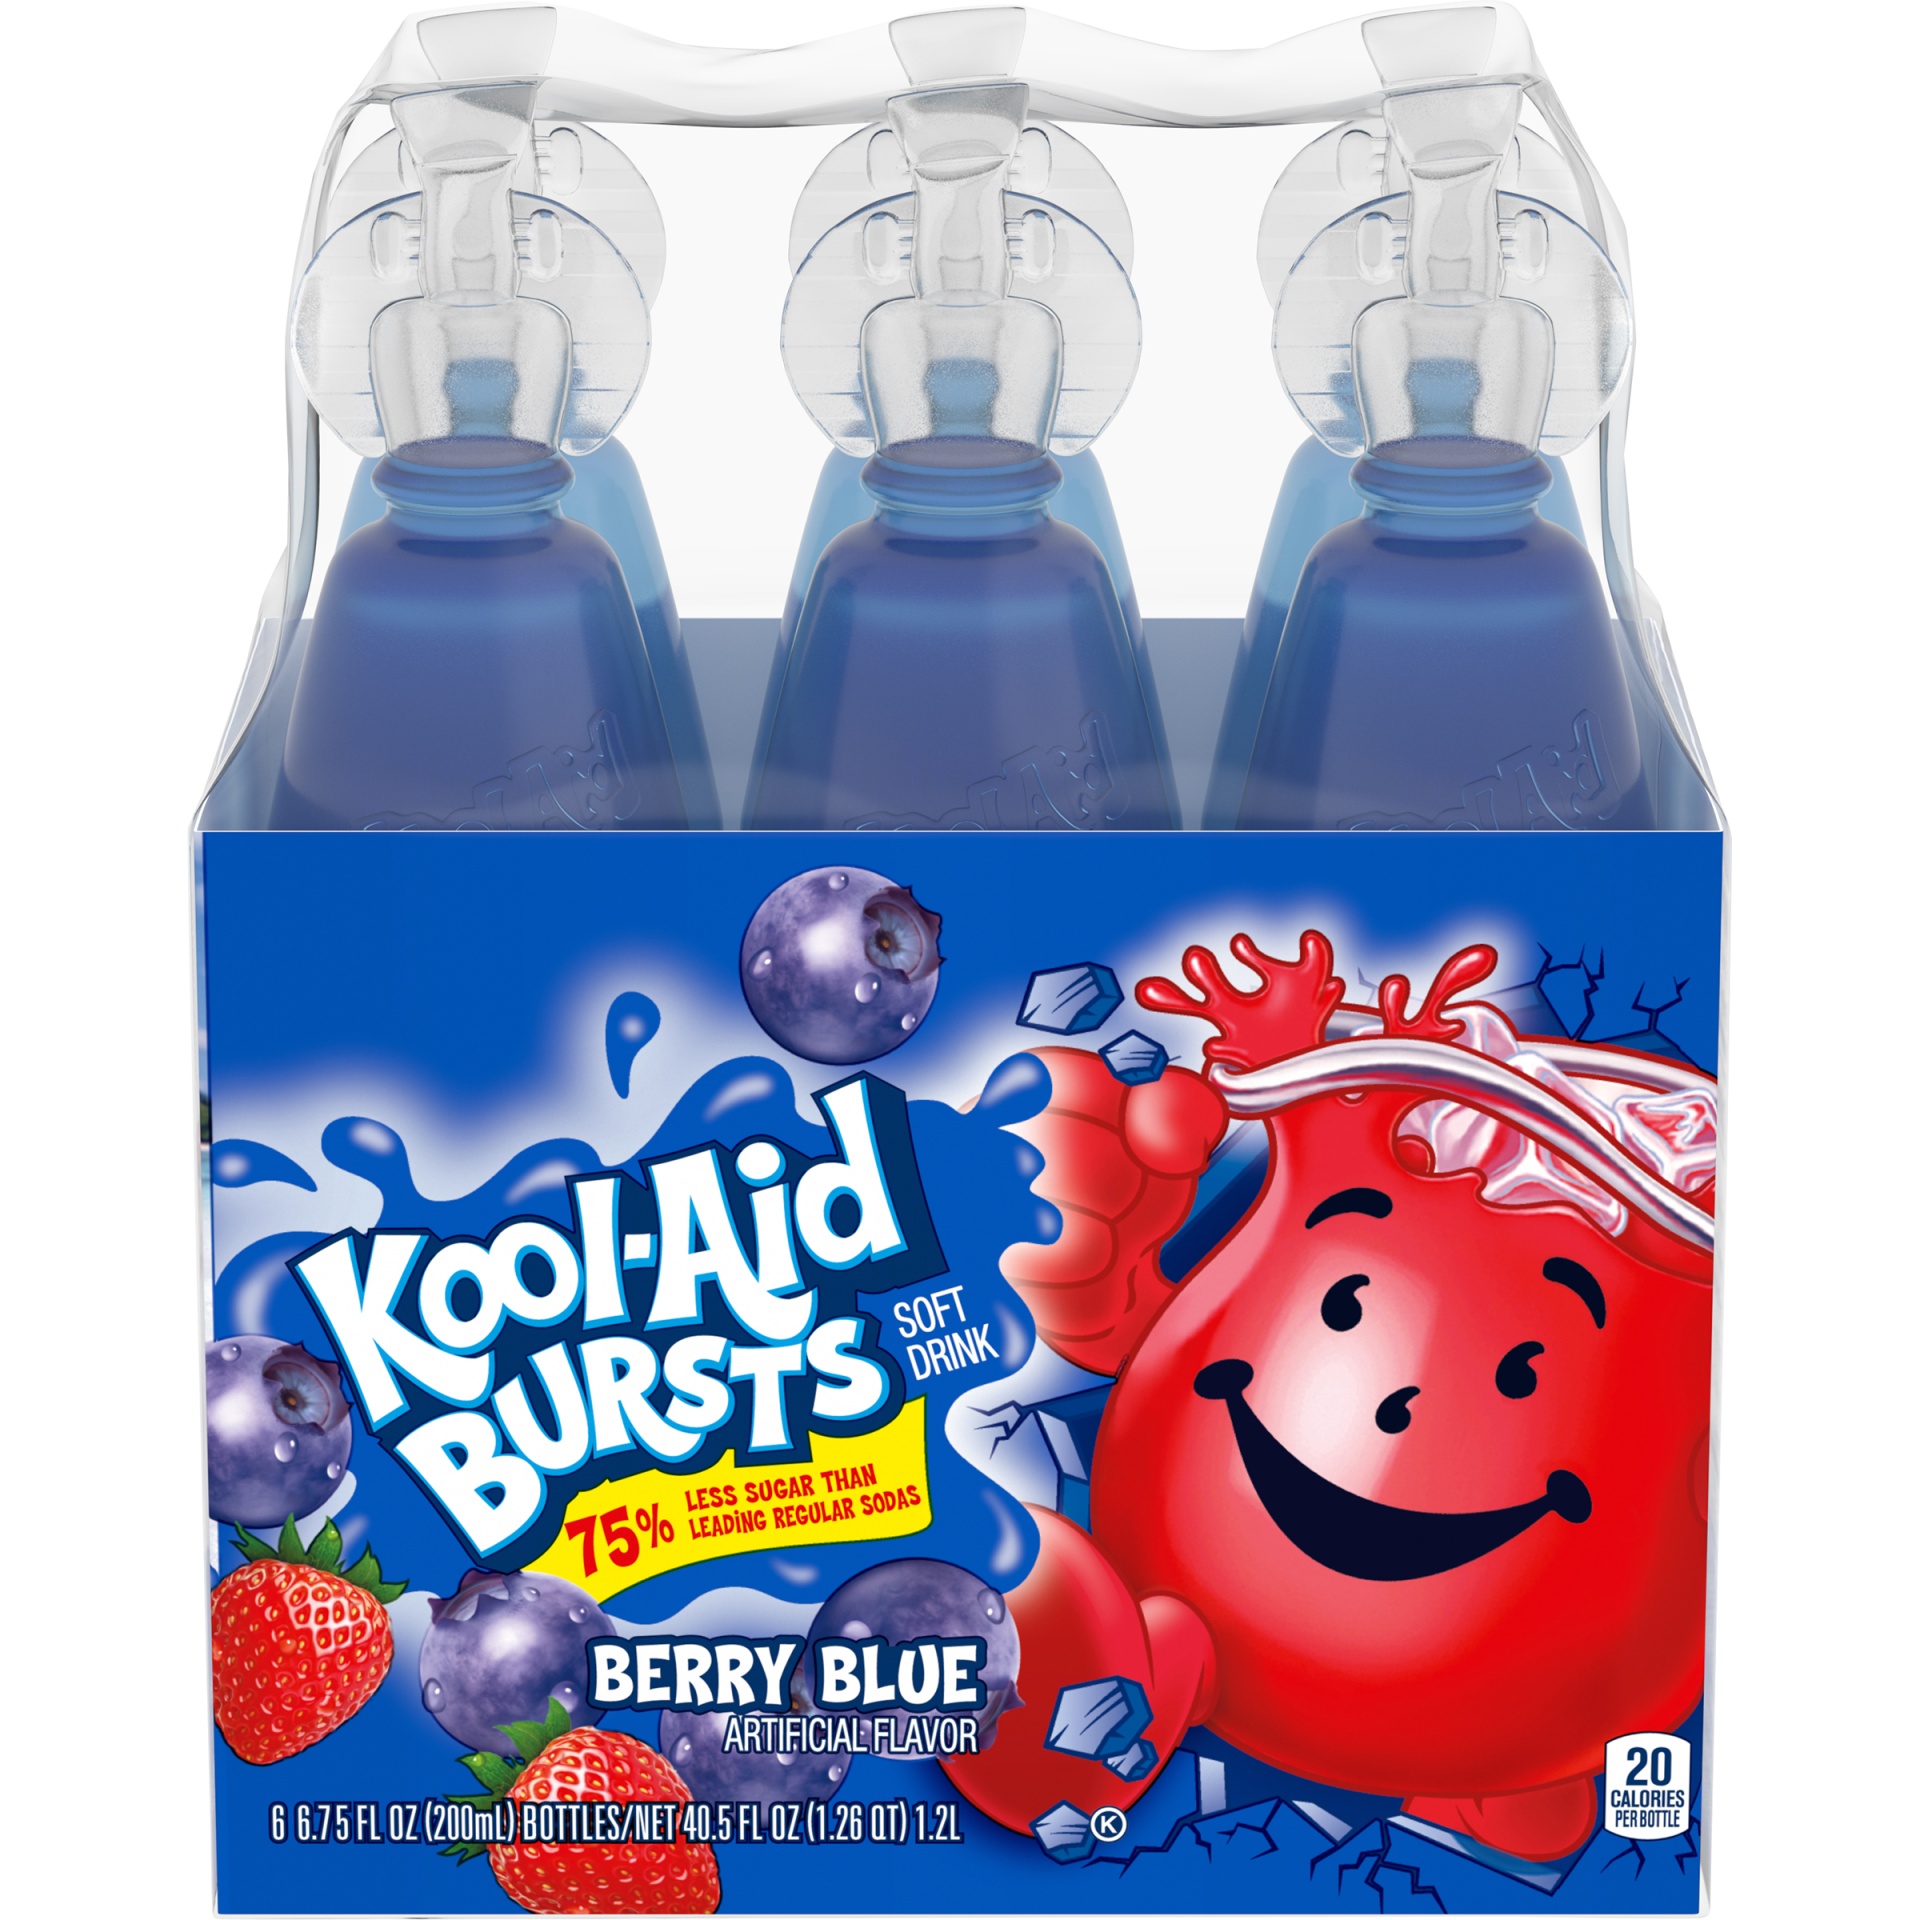 slide 1 of 11, Kool-Aid Bursts Berry Blue Artificially Flavored Soft Drink Pack, 6 ct; 6.75 fl oz